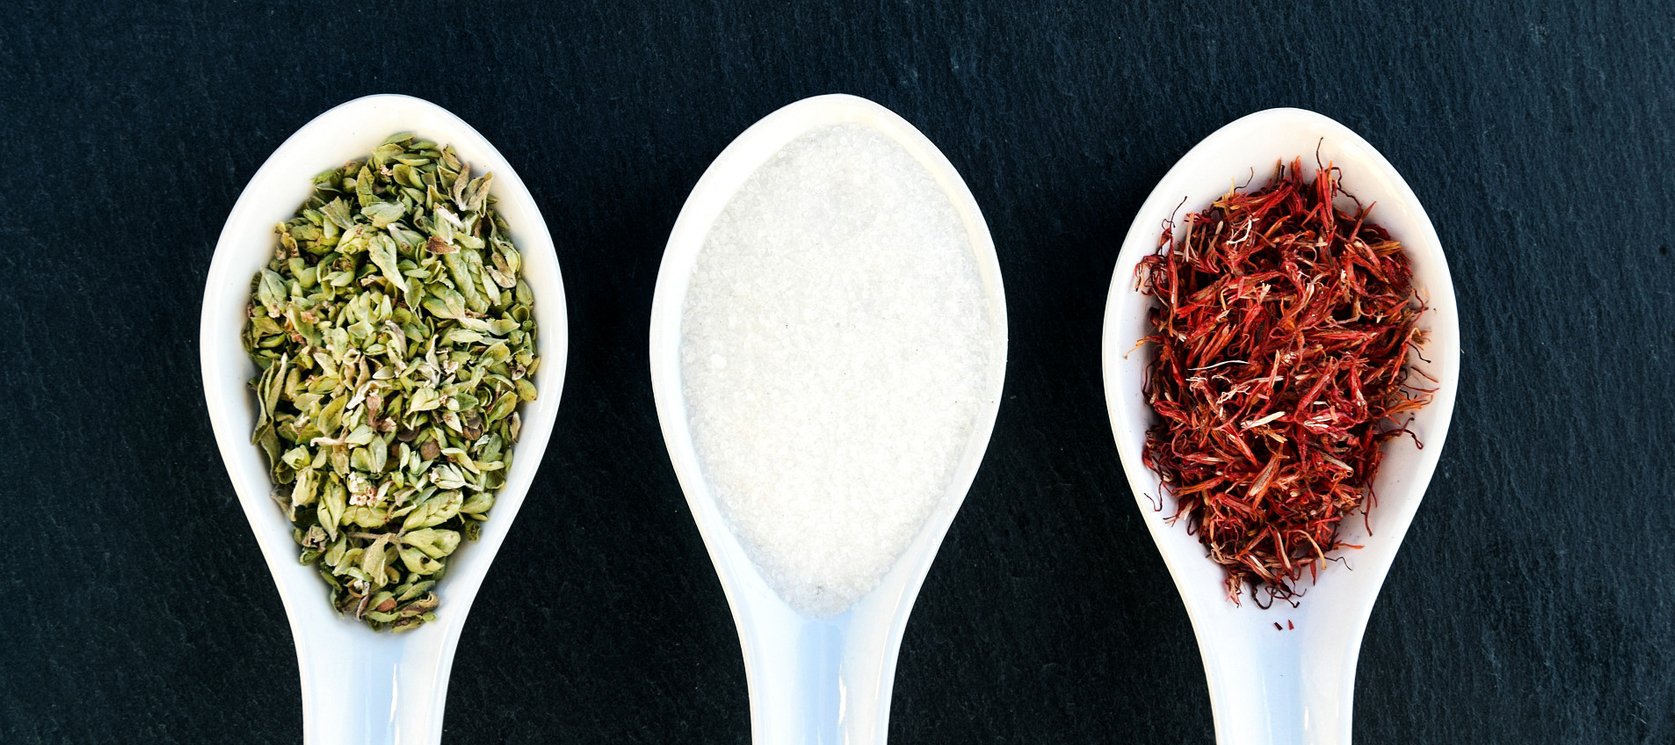 three spoons with different herbs and spices